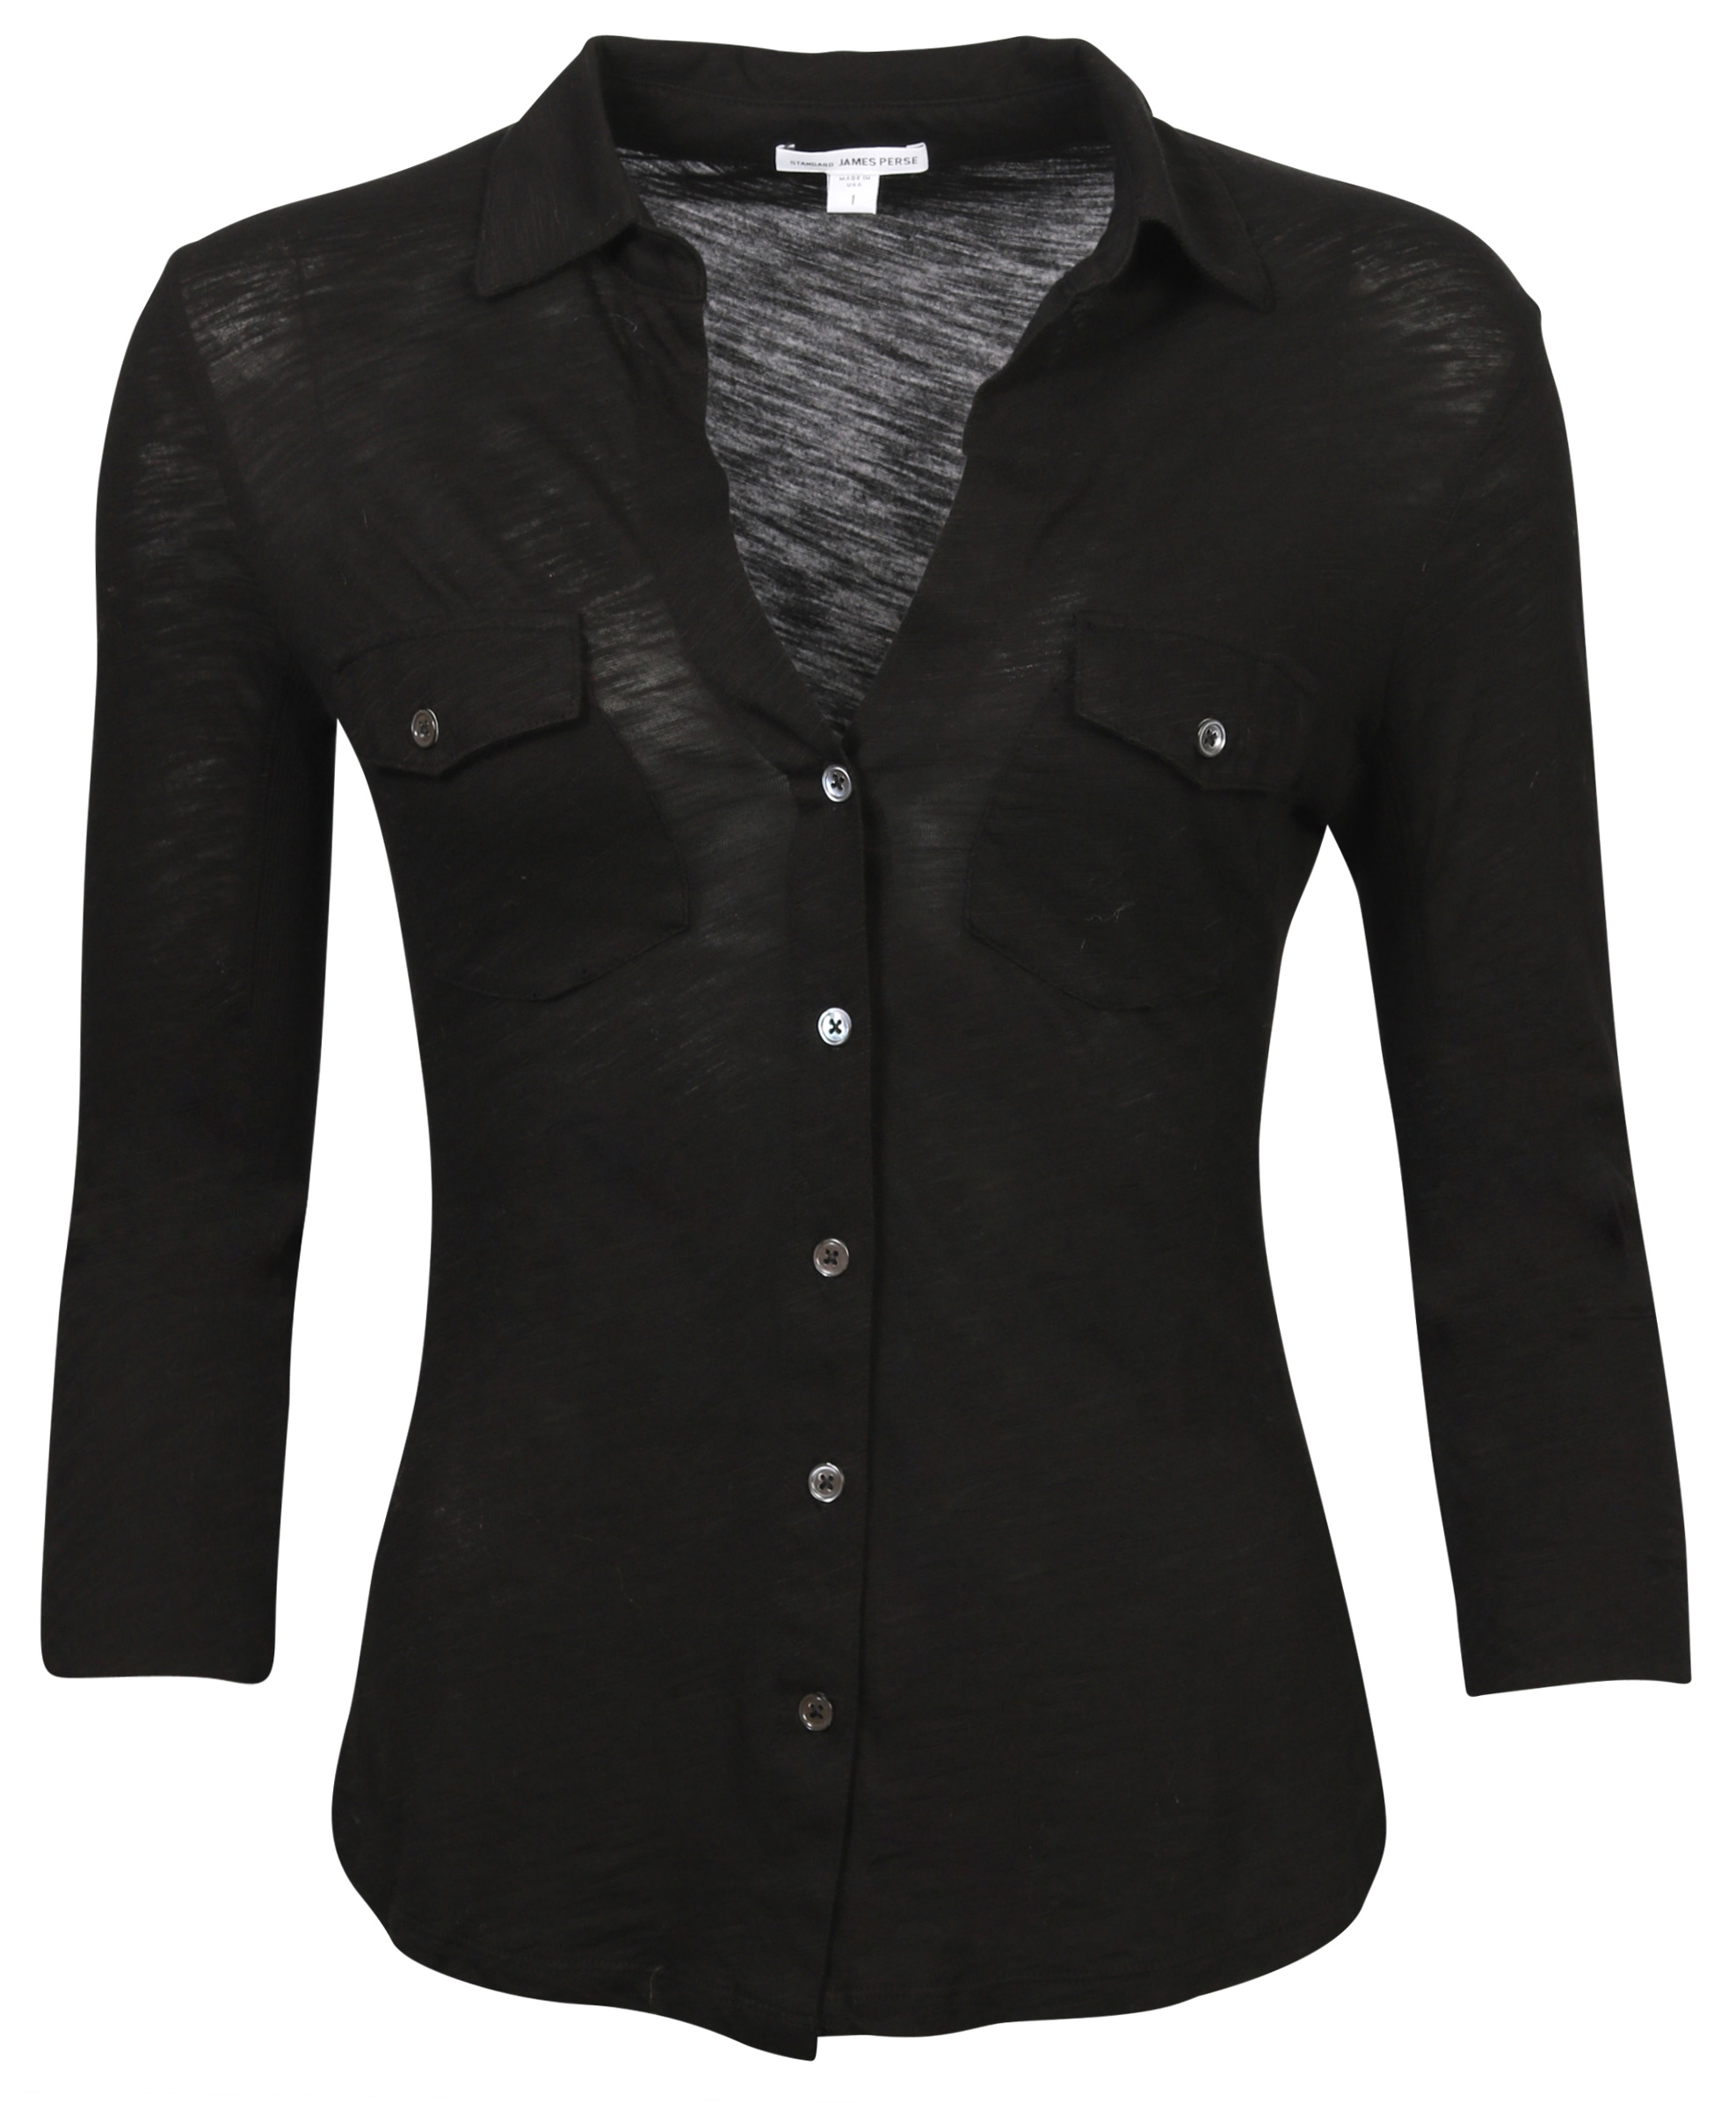 JAMES PERSE Contrast Panel Shirt in Black 2/M